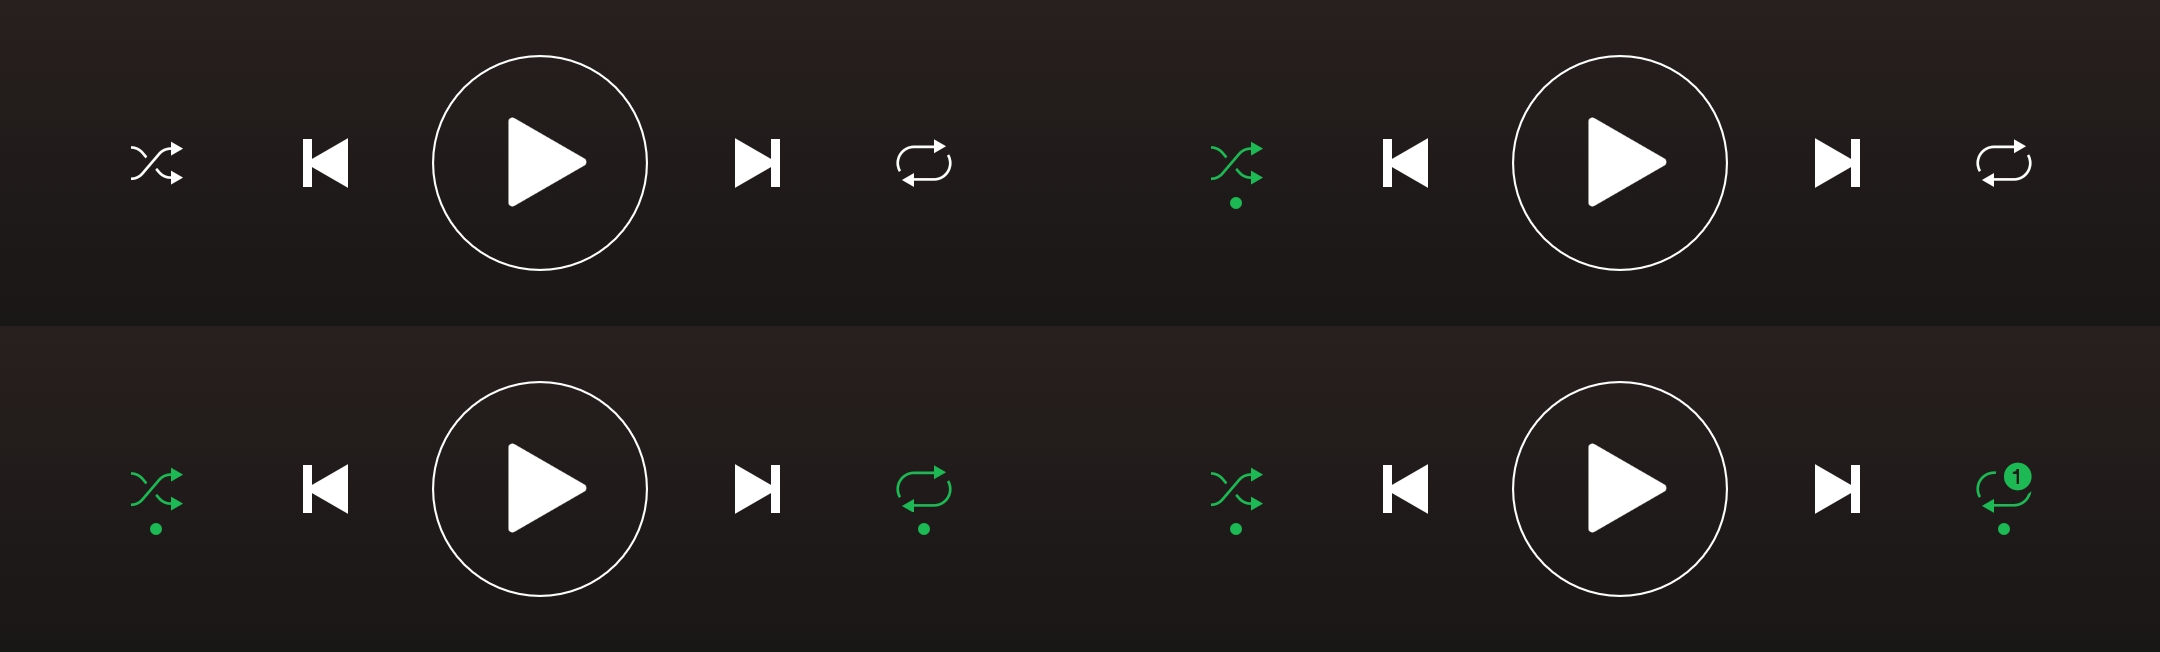 Different states of the shuffle and repeat button